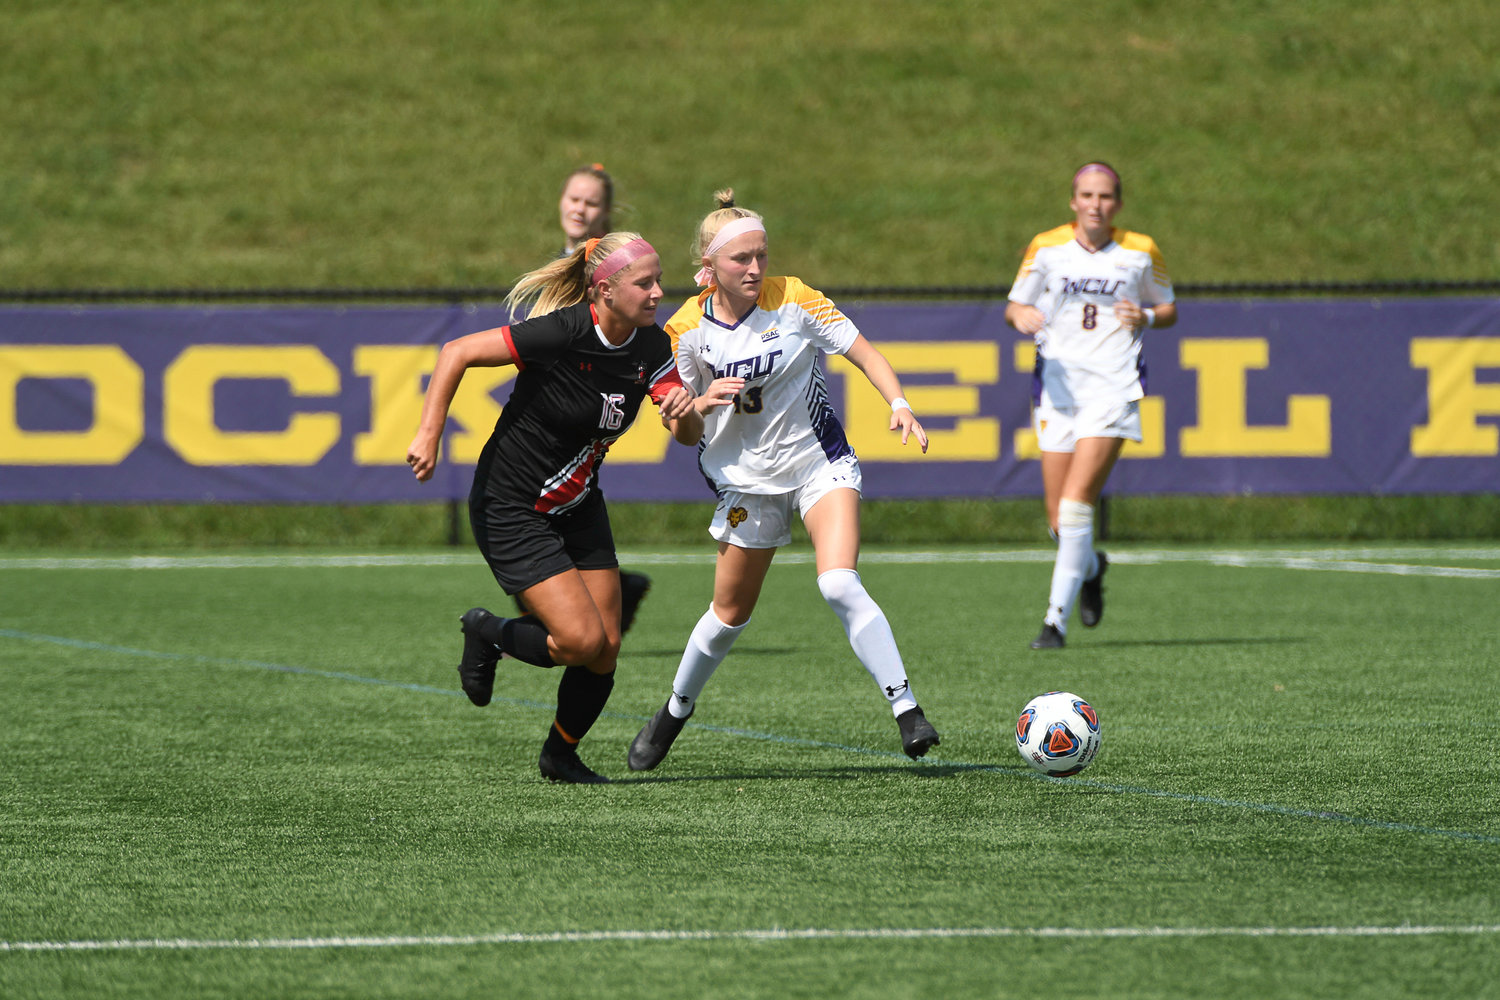 Bucks County products Alyson Cutter (No. 13), Becca Margolis (No. 24) and Nicolette Harrison (No. 20) helped West Chester reach the NCAA Elite Eight last fall.